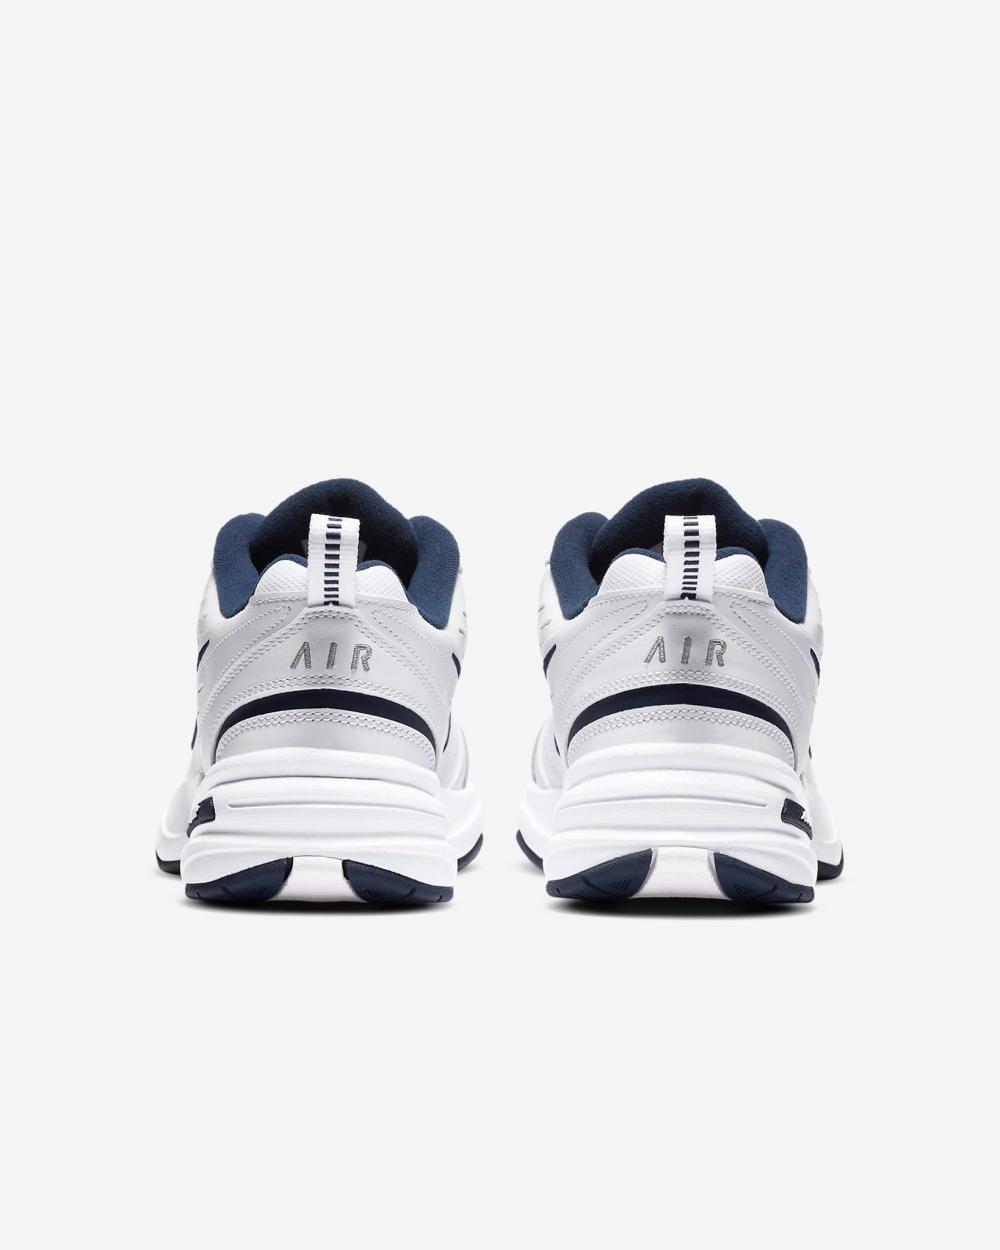 Giày Nike Air Monarch Iv White Navy - 415445 102 | King Shoes Sneaker Real  Hcm